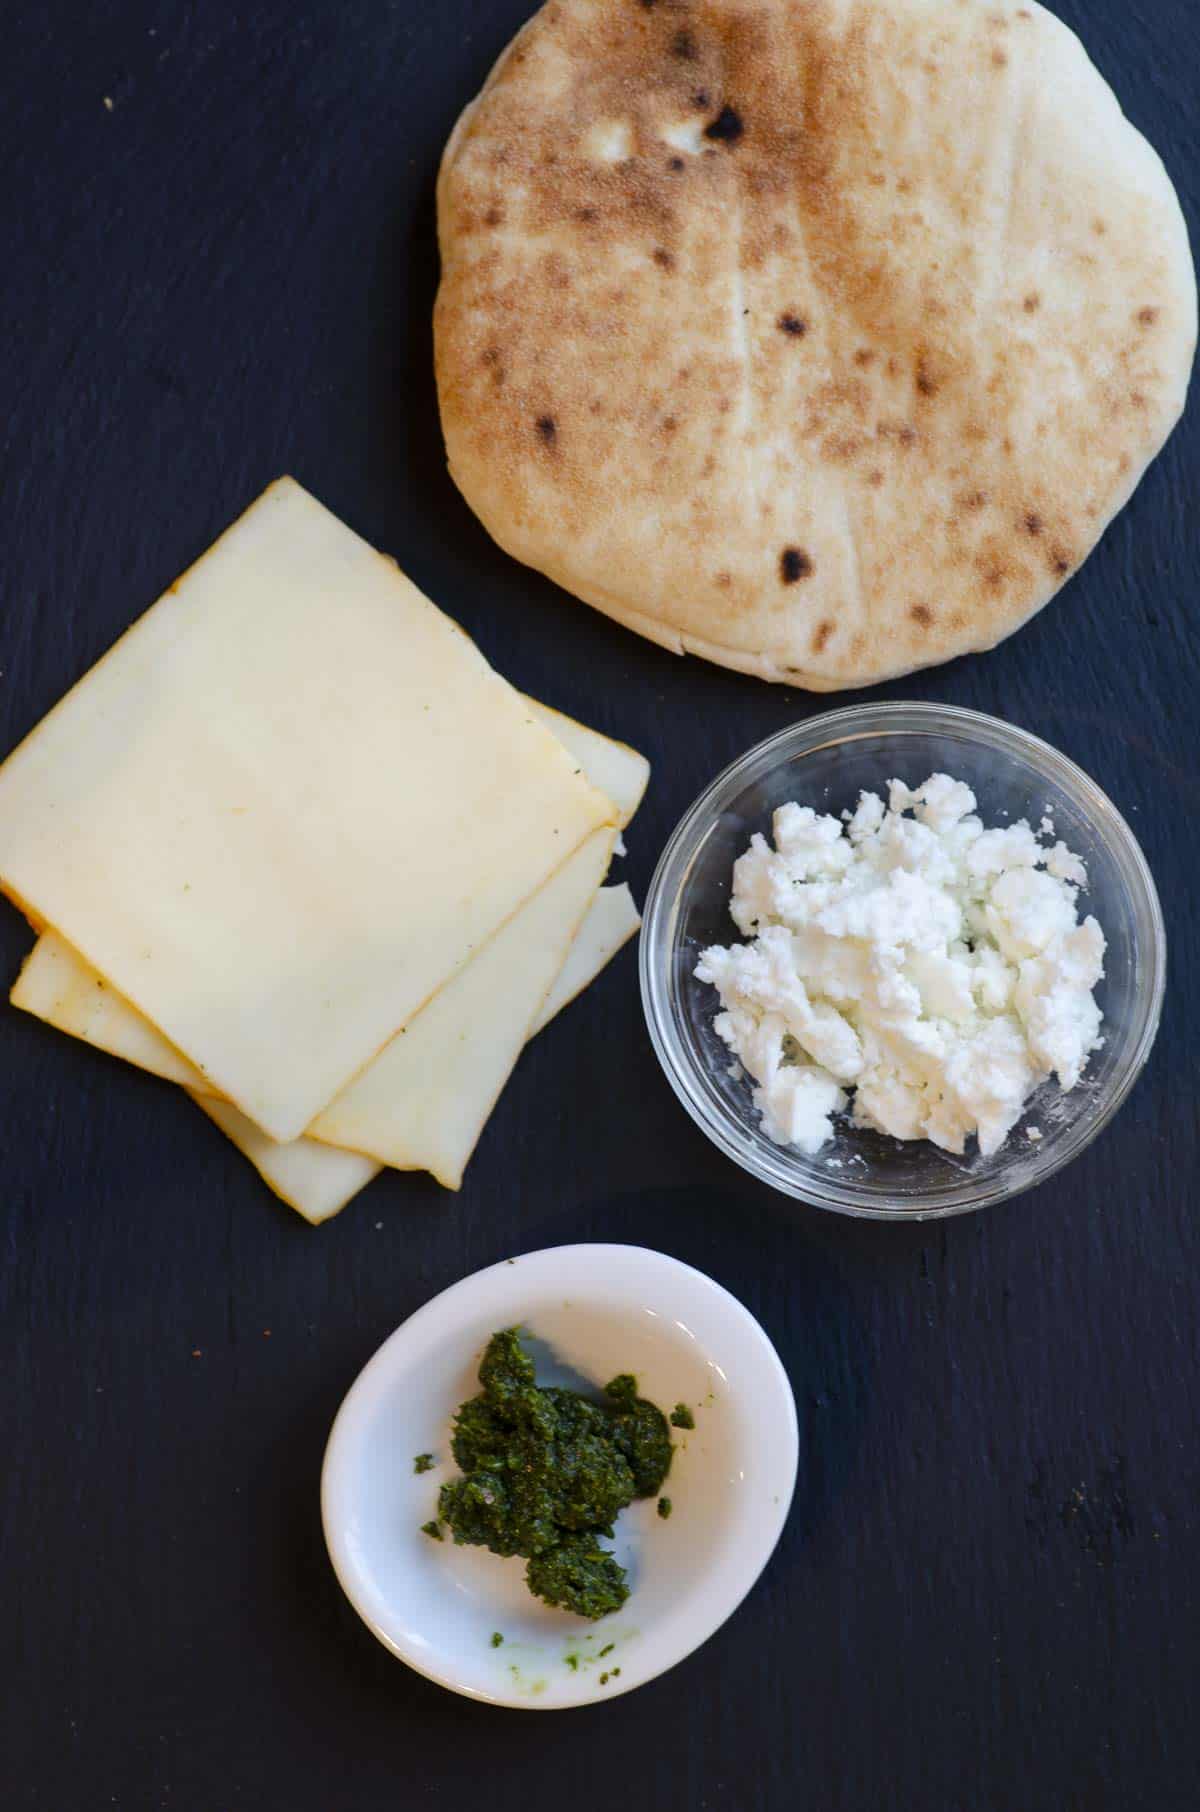 Ingredients for pita grilled cheese sandwich
